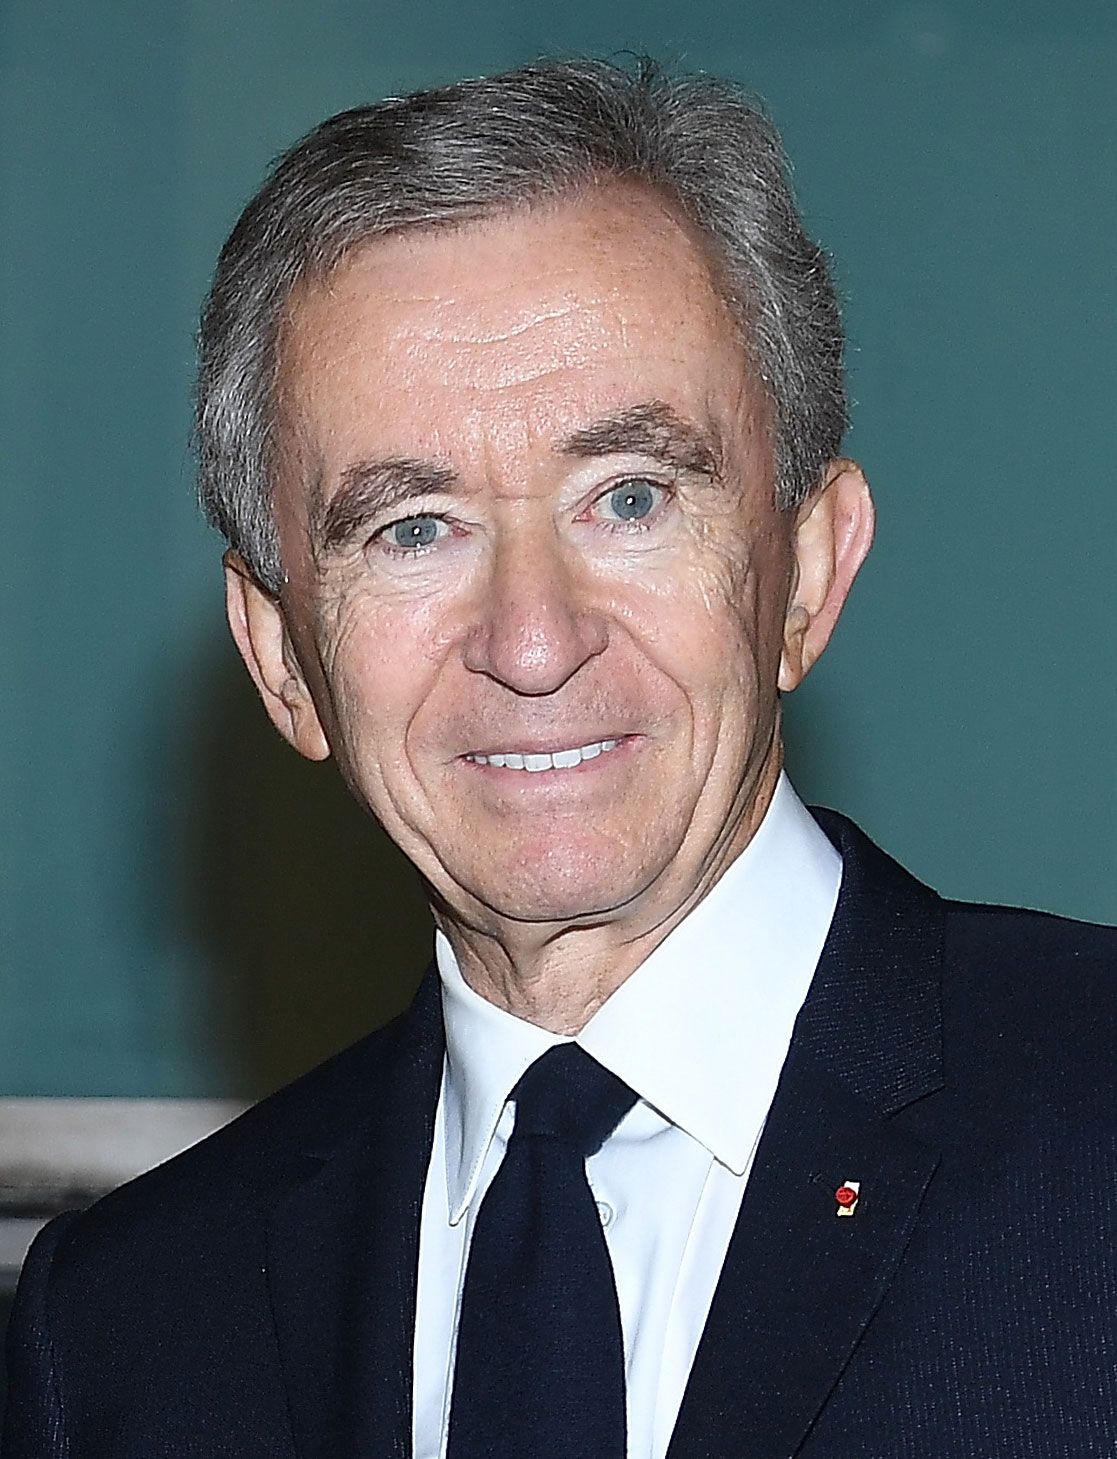 Discover How Bernard Arnault Became The World's Richest Person: A Success Story